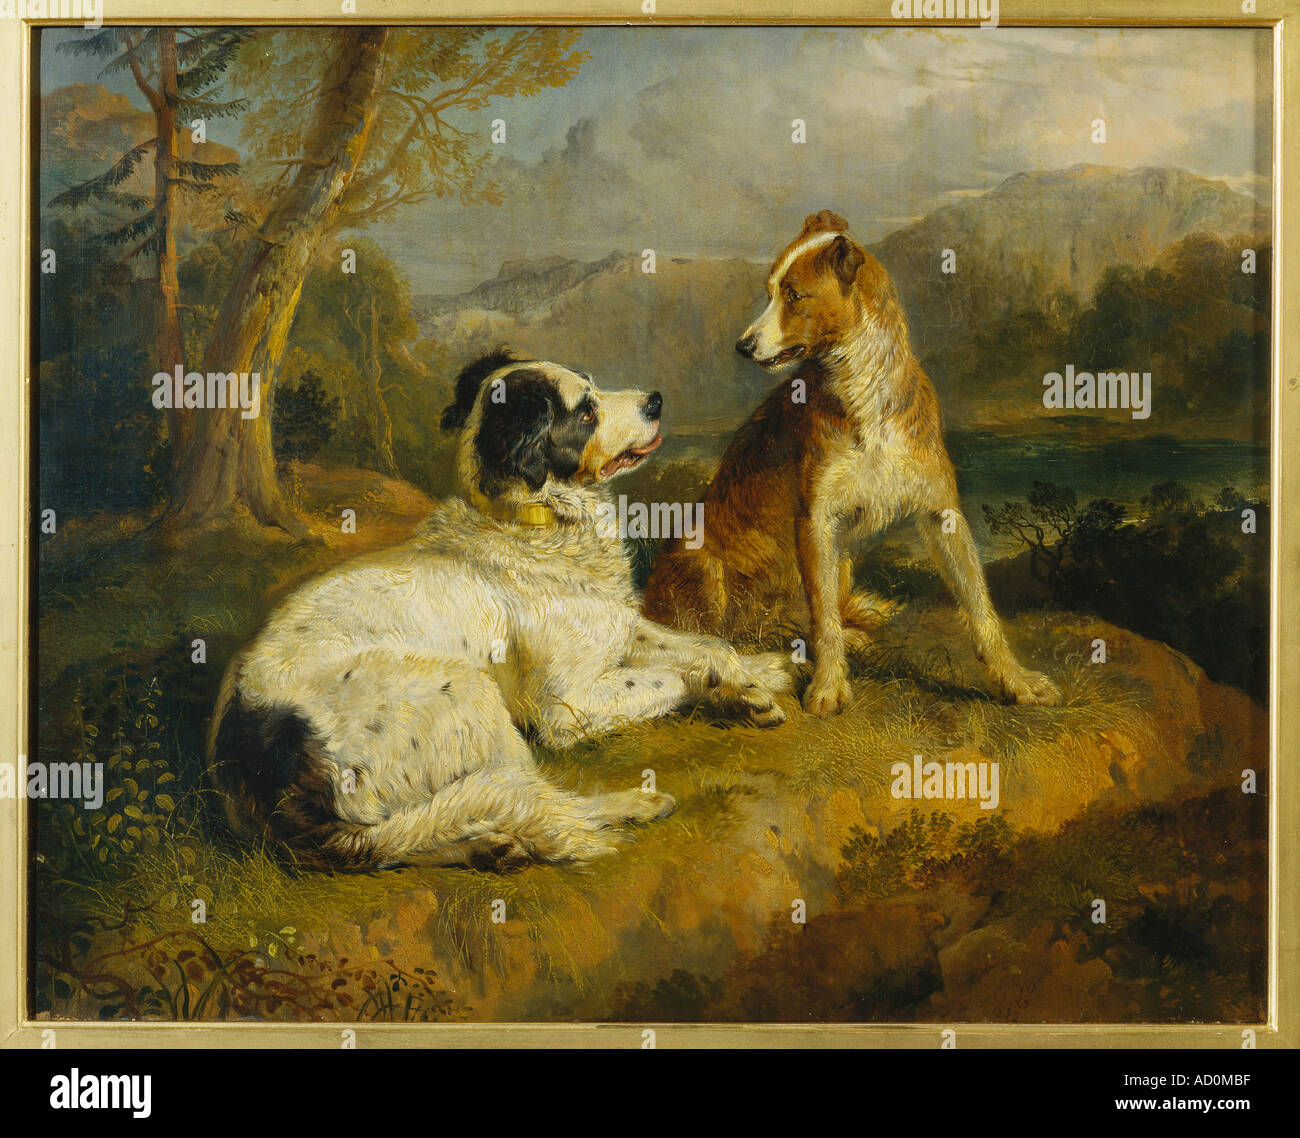 The Two Dogs By Sir Edwin Landseer England 1822 Stock Photo Alamy